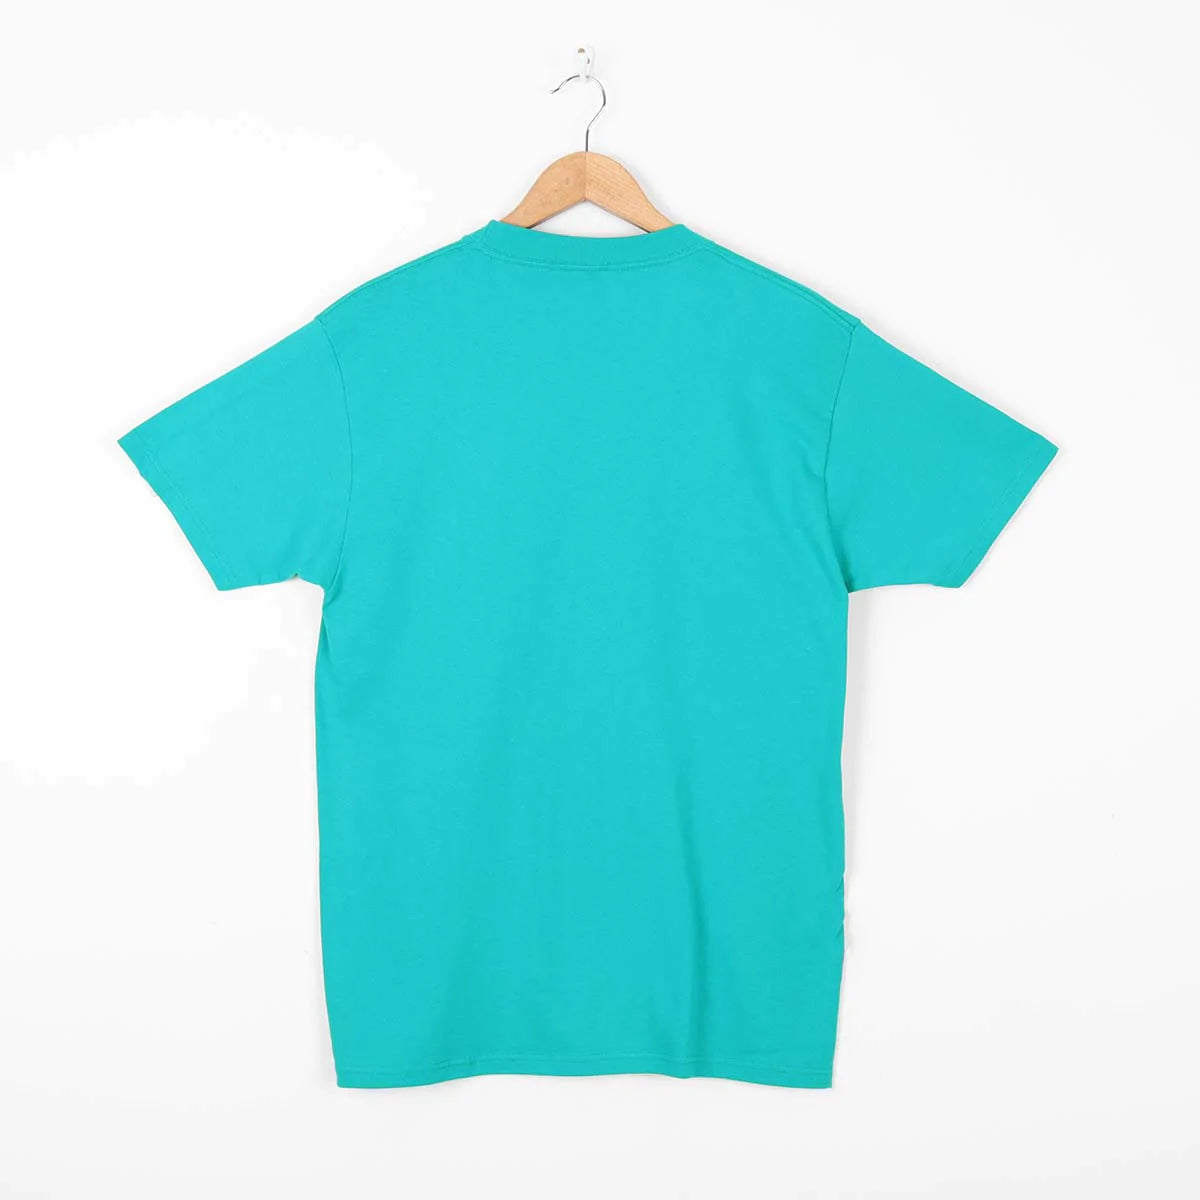 OBA-E (Obey eyes icon 3 classic tee teal) 102291522 OBEY